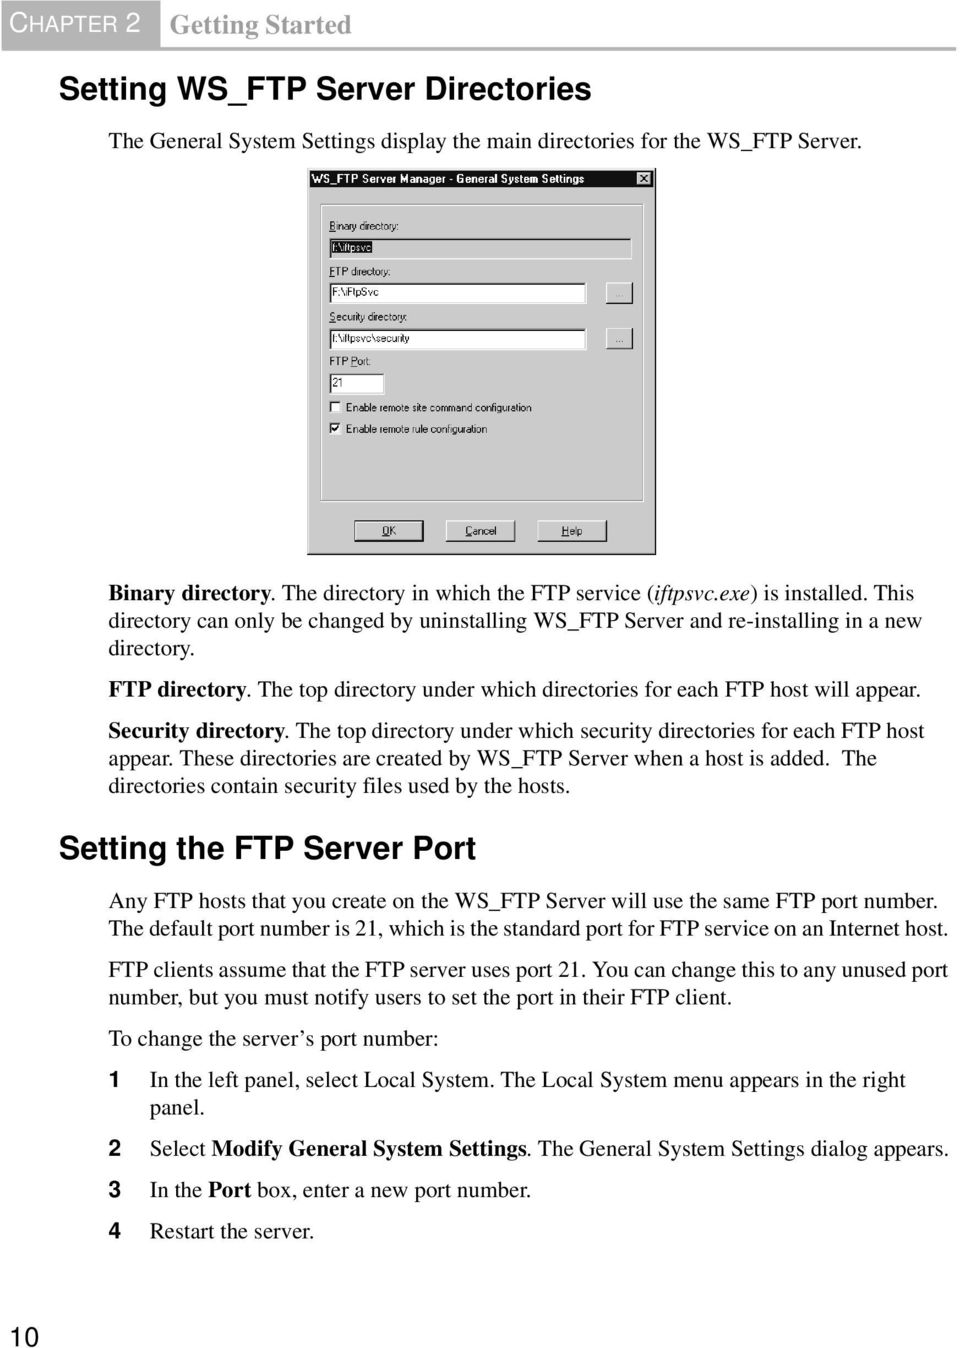 The top directory under which directories for each FTP host will appear. Security directory. The top directory under which security directories for each FTP host appear.